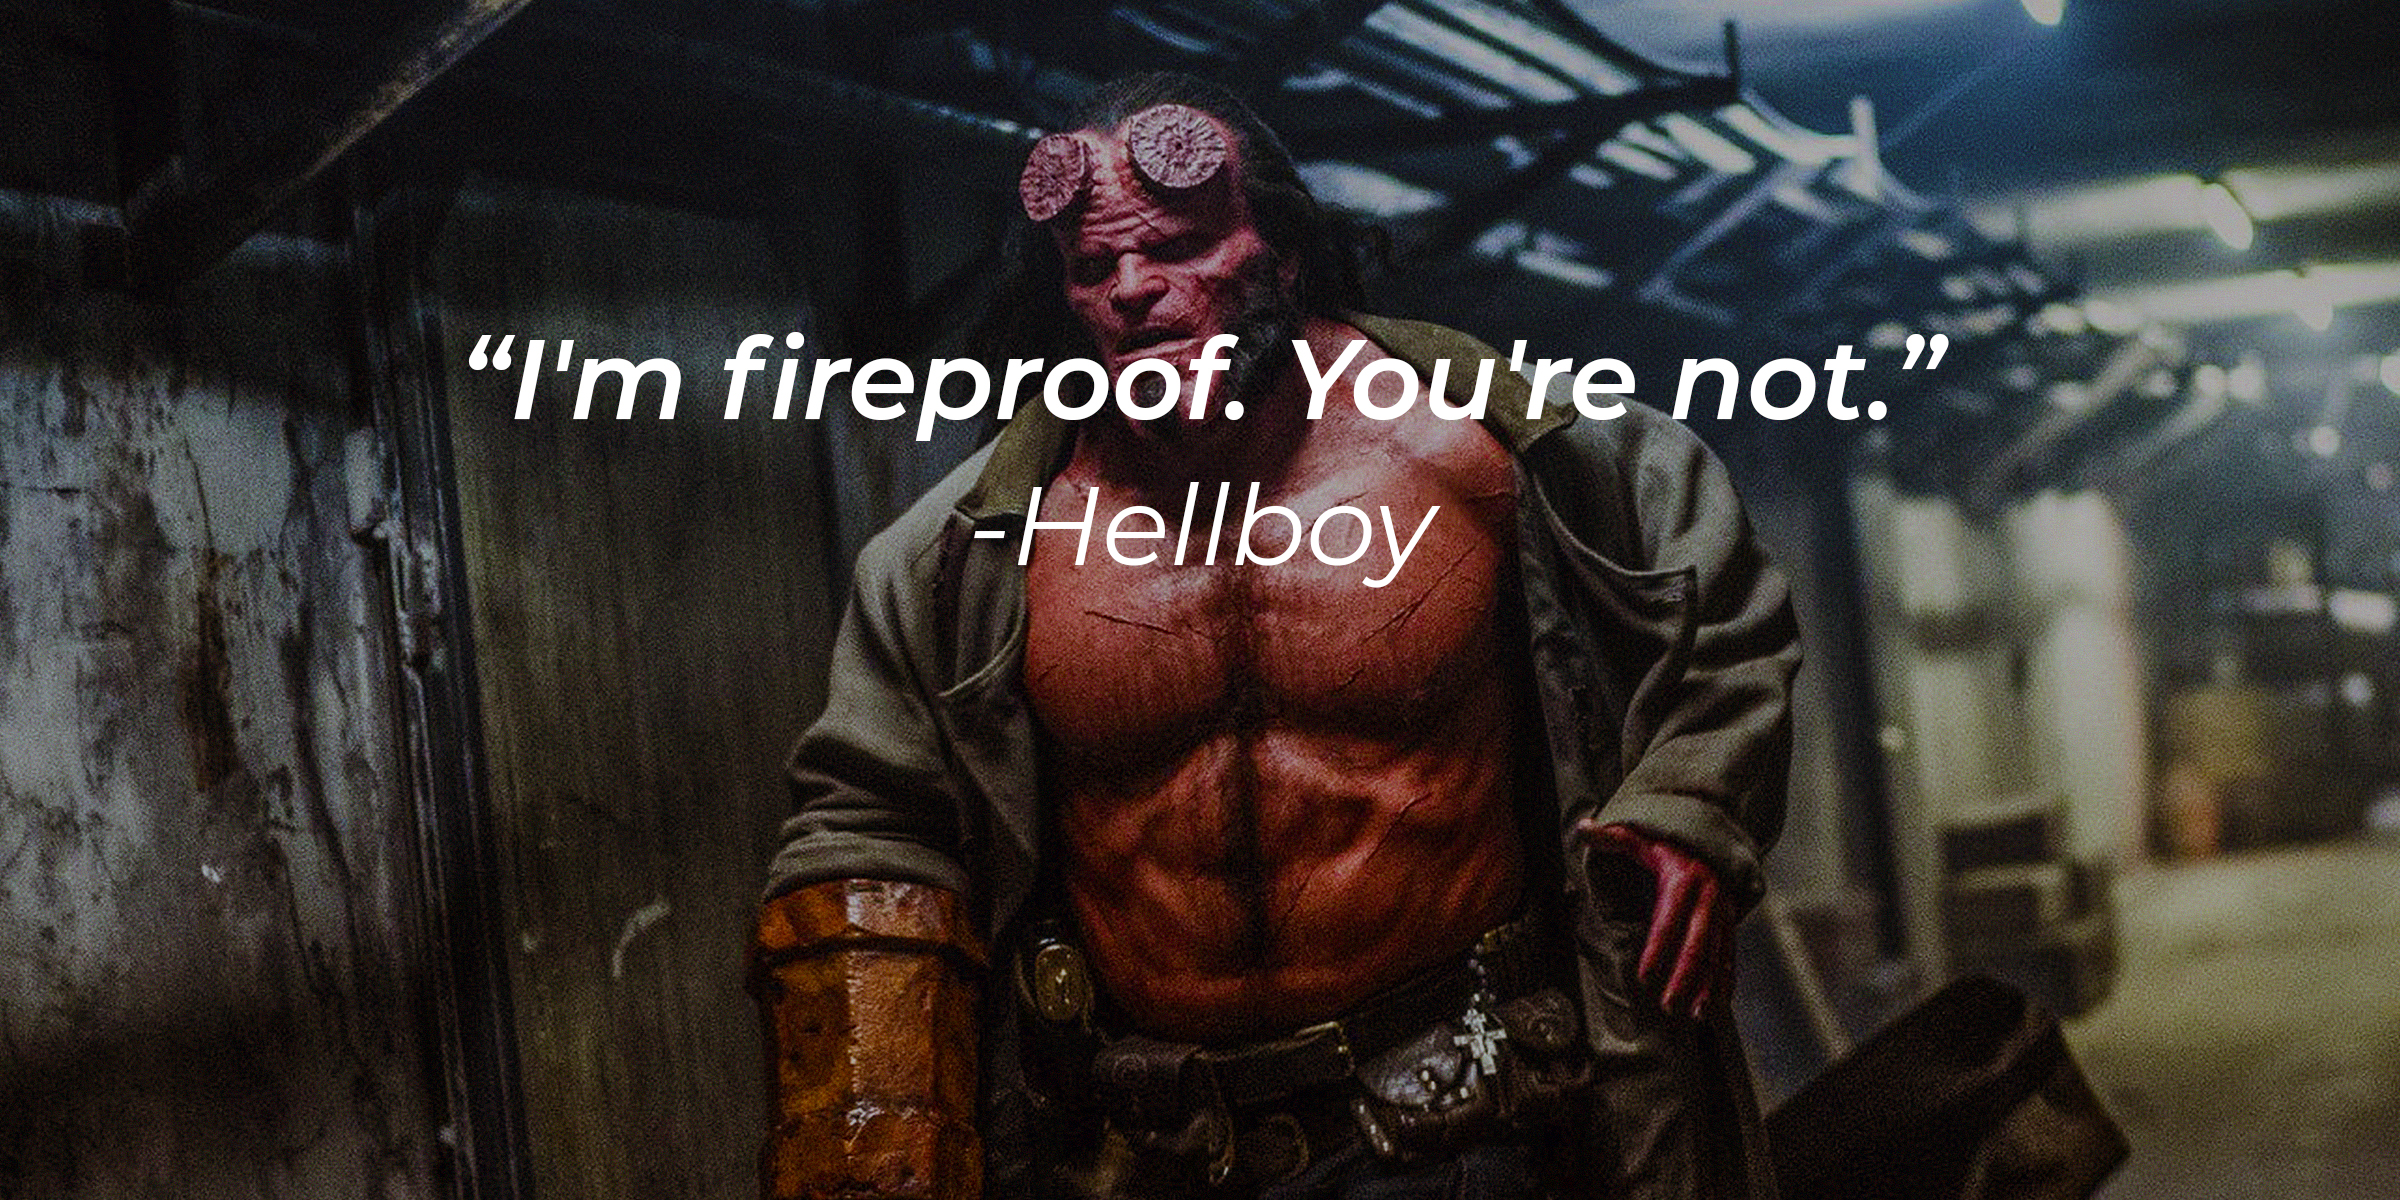 Hellboy with his quote: "I'm fireproof. You're not." | Source: facebook.com/hellboymovie